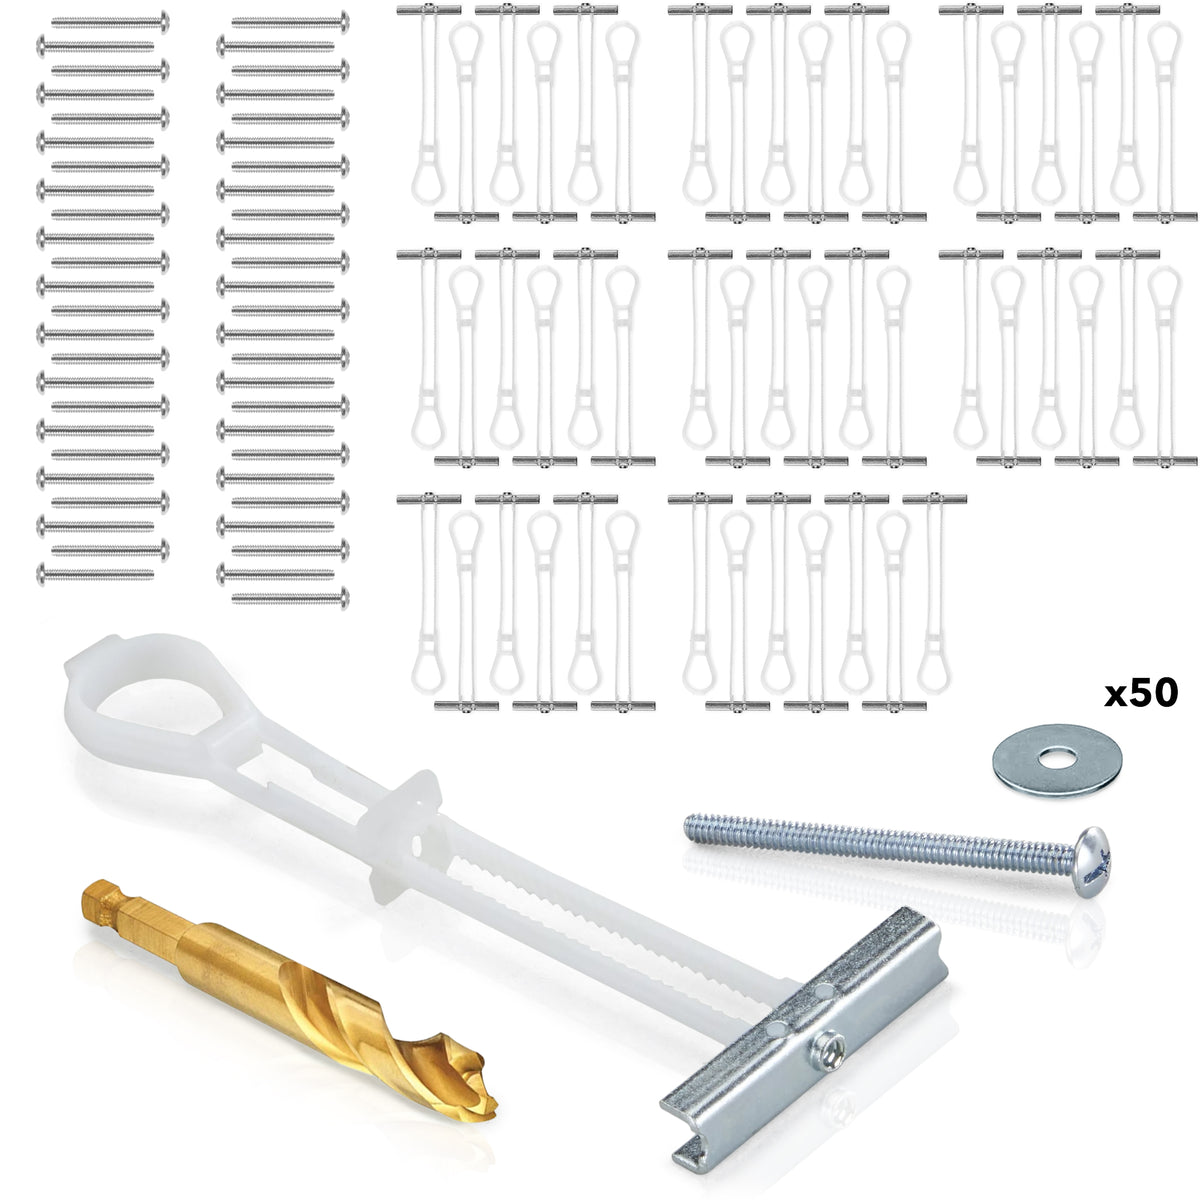 Metal Stud Anchor Kit | - Set of 50 Anchors with Drill Bit